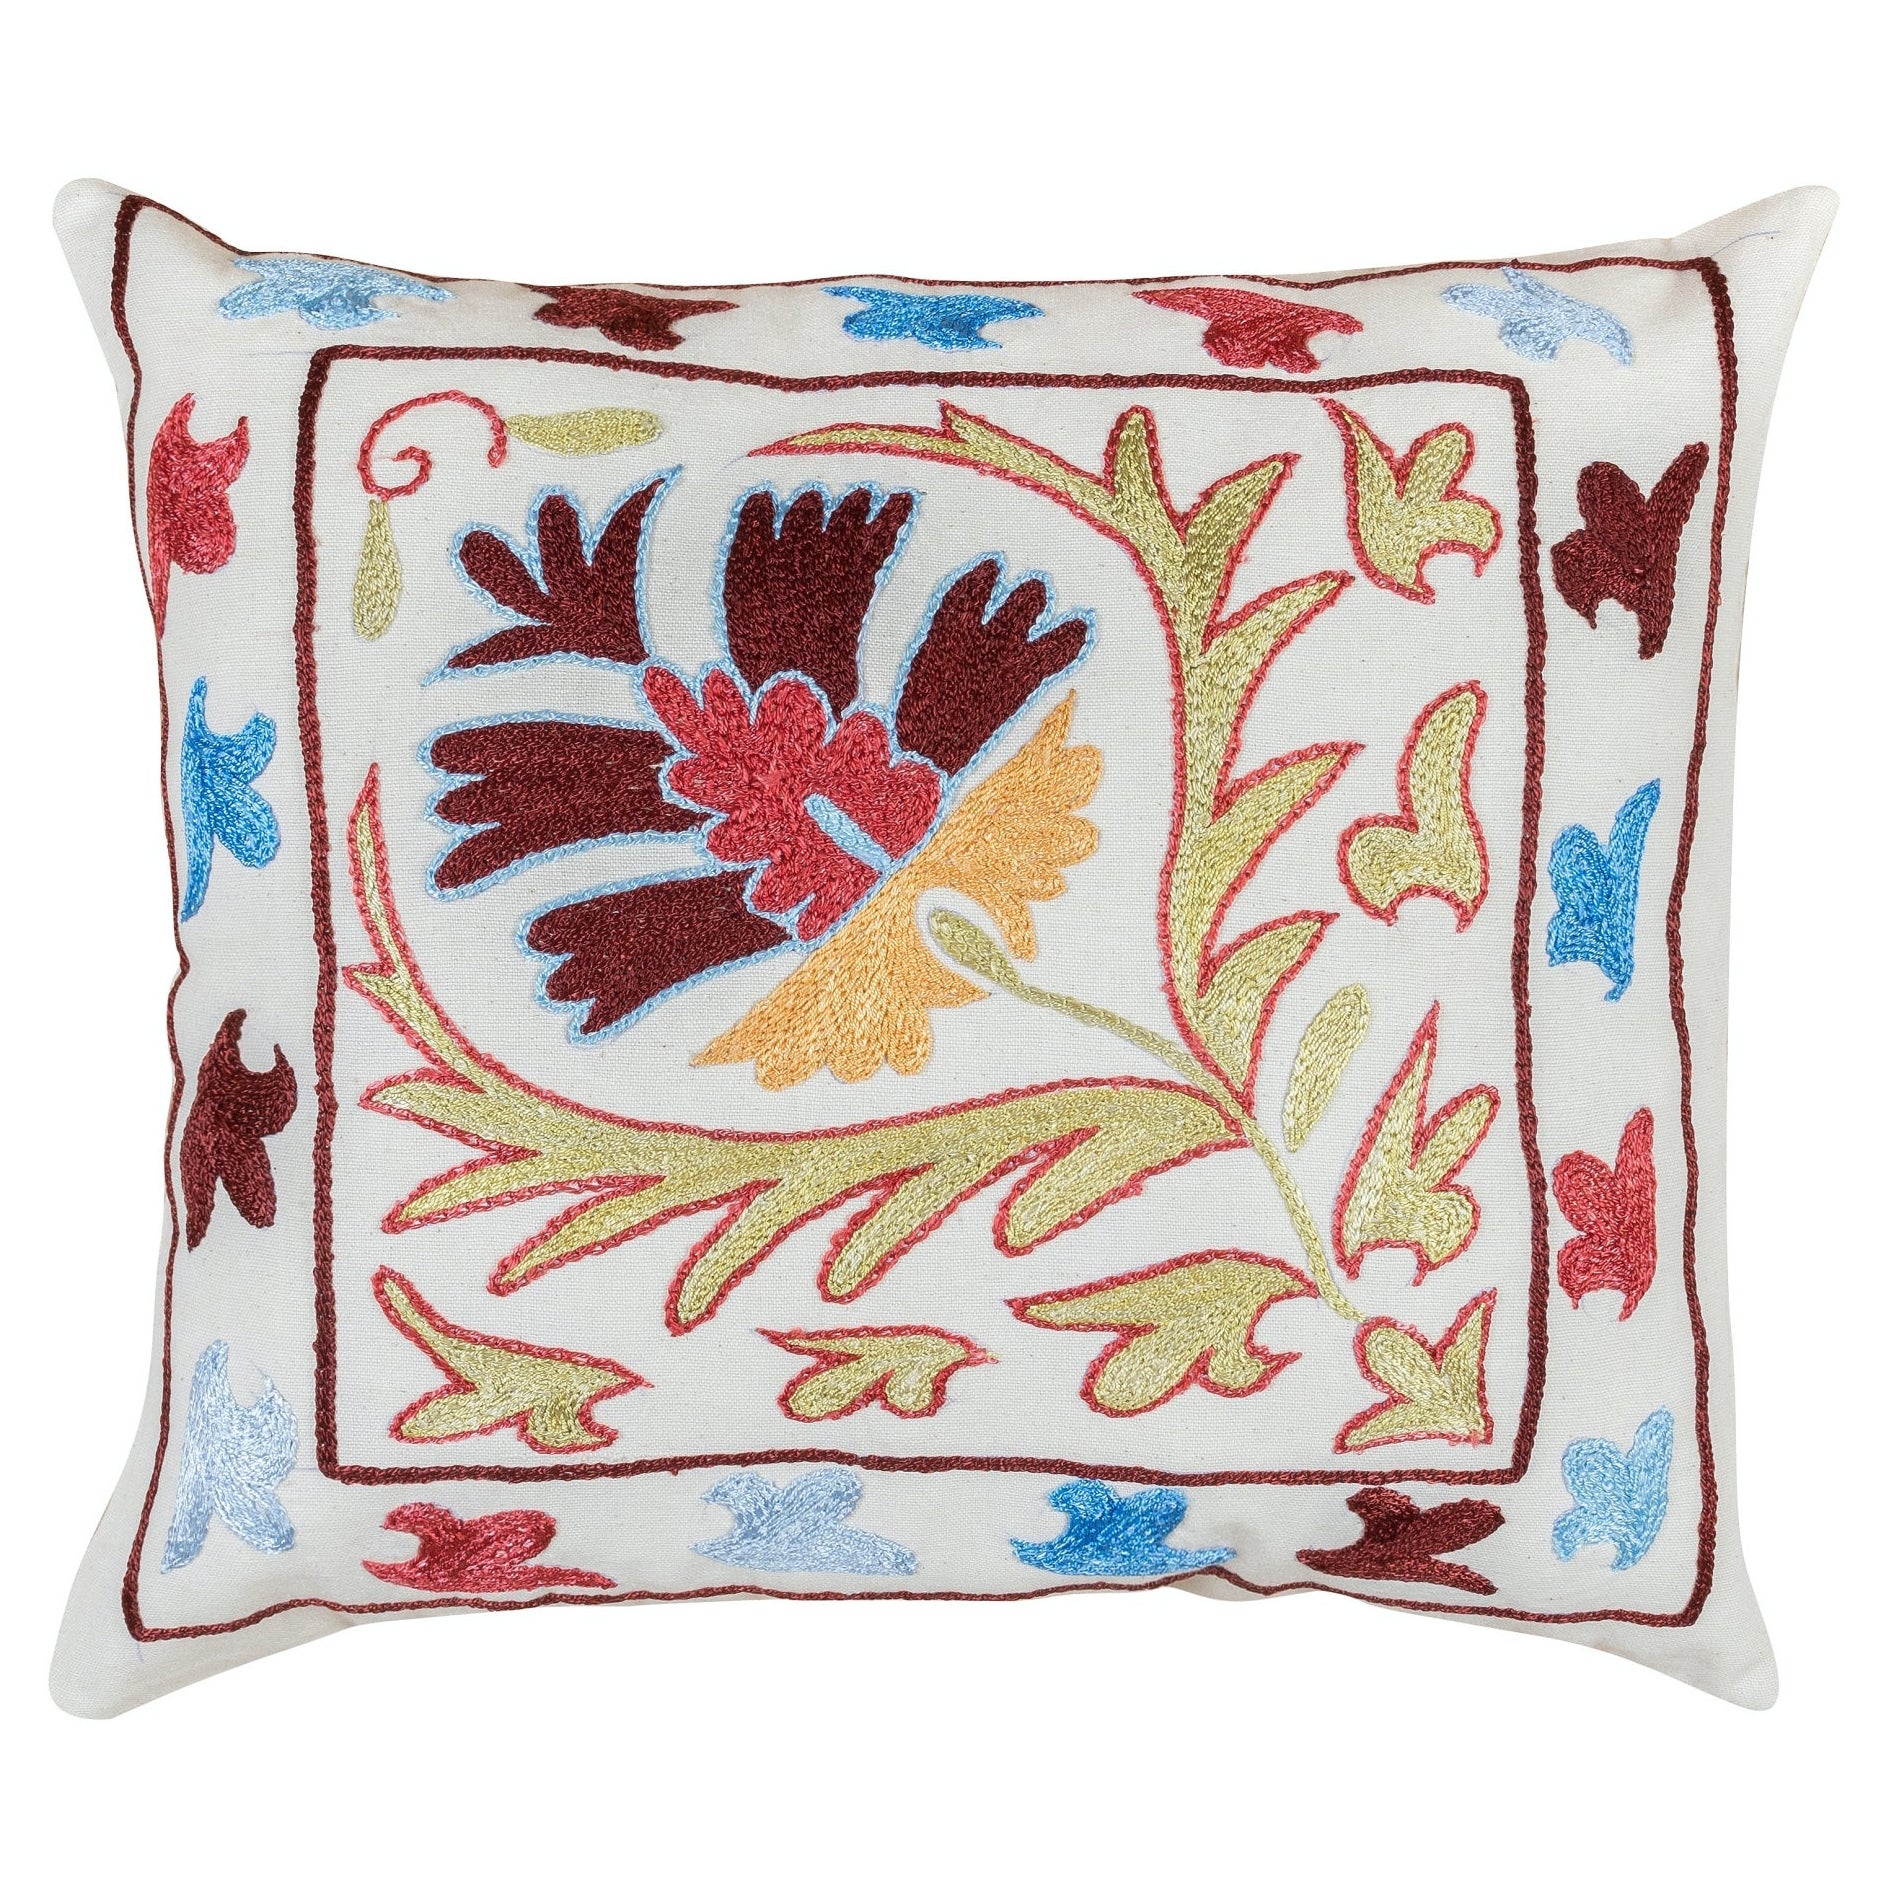 Colorful Hand Embroidered Silk Cushion Cover, Suzani Throw Pillow Cover